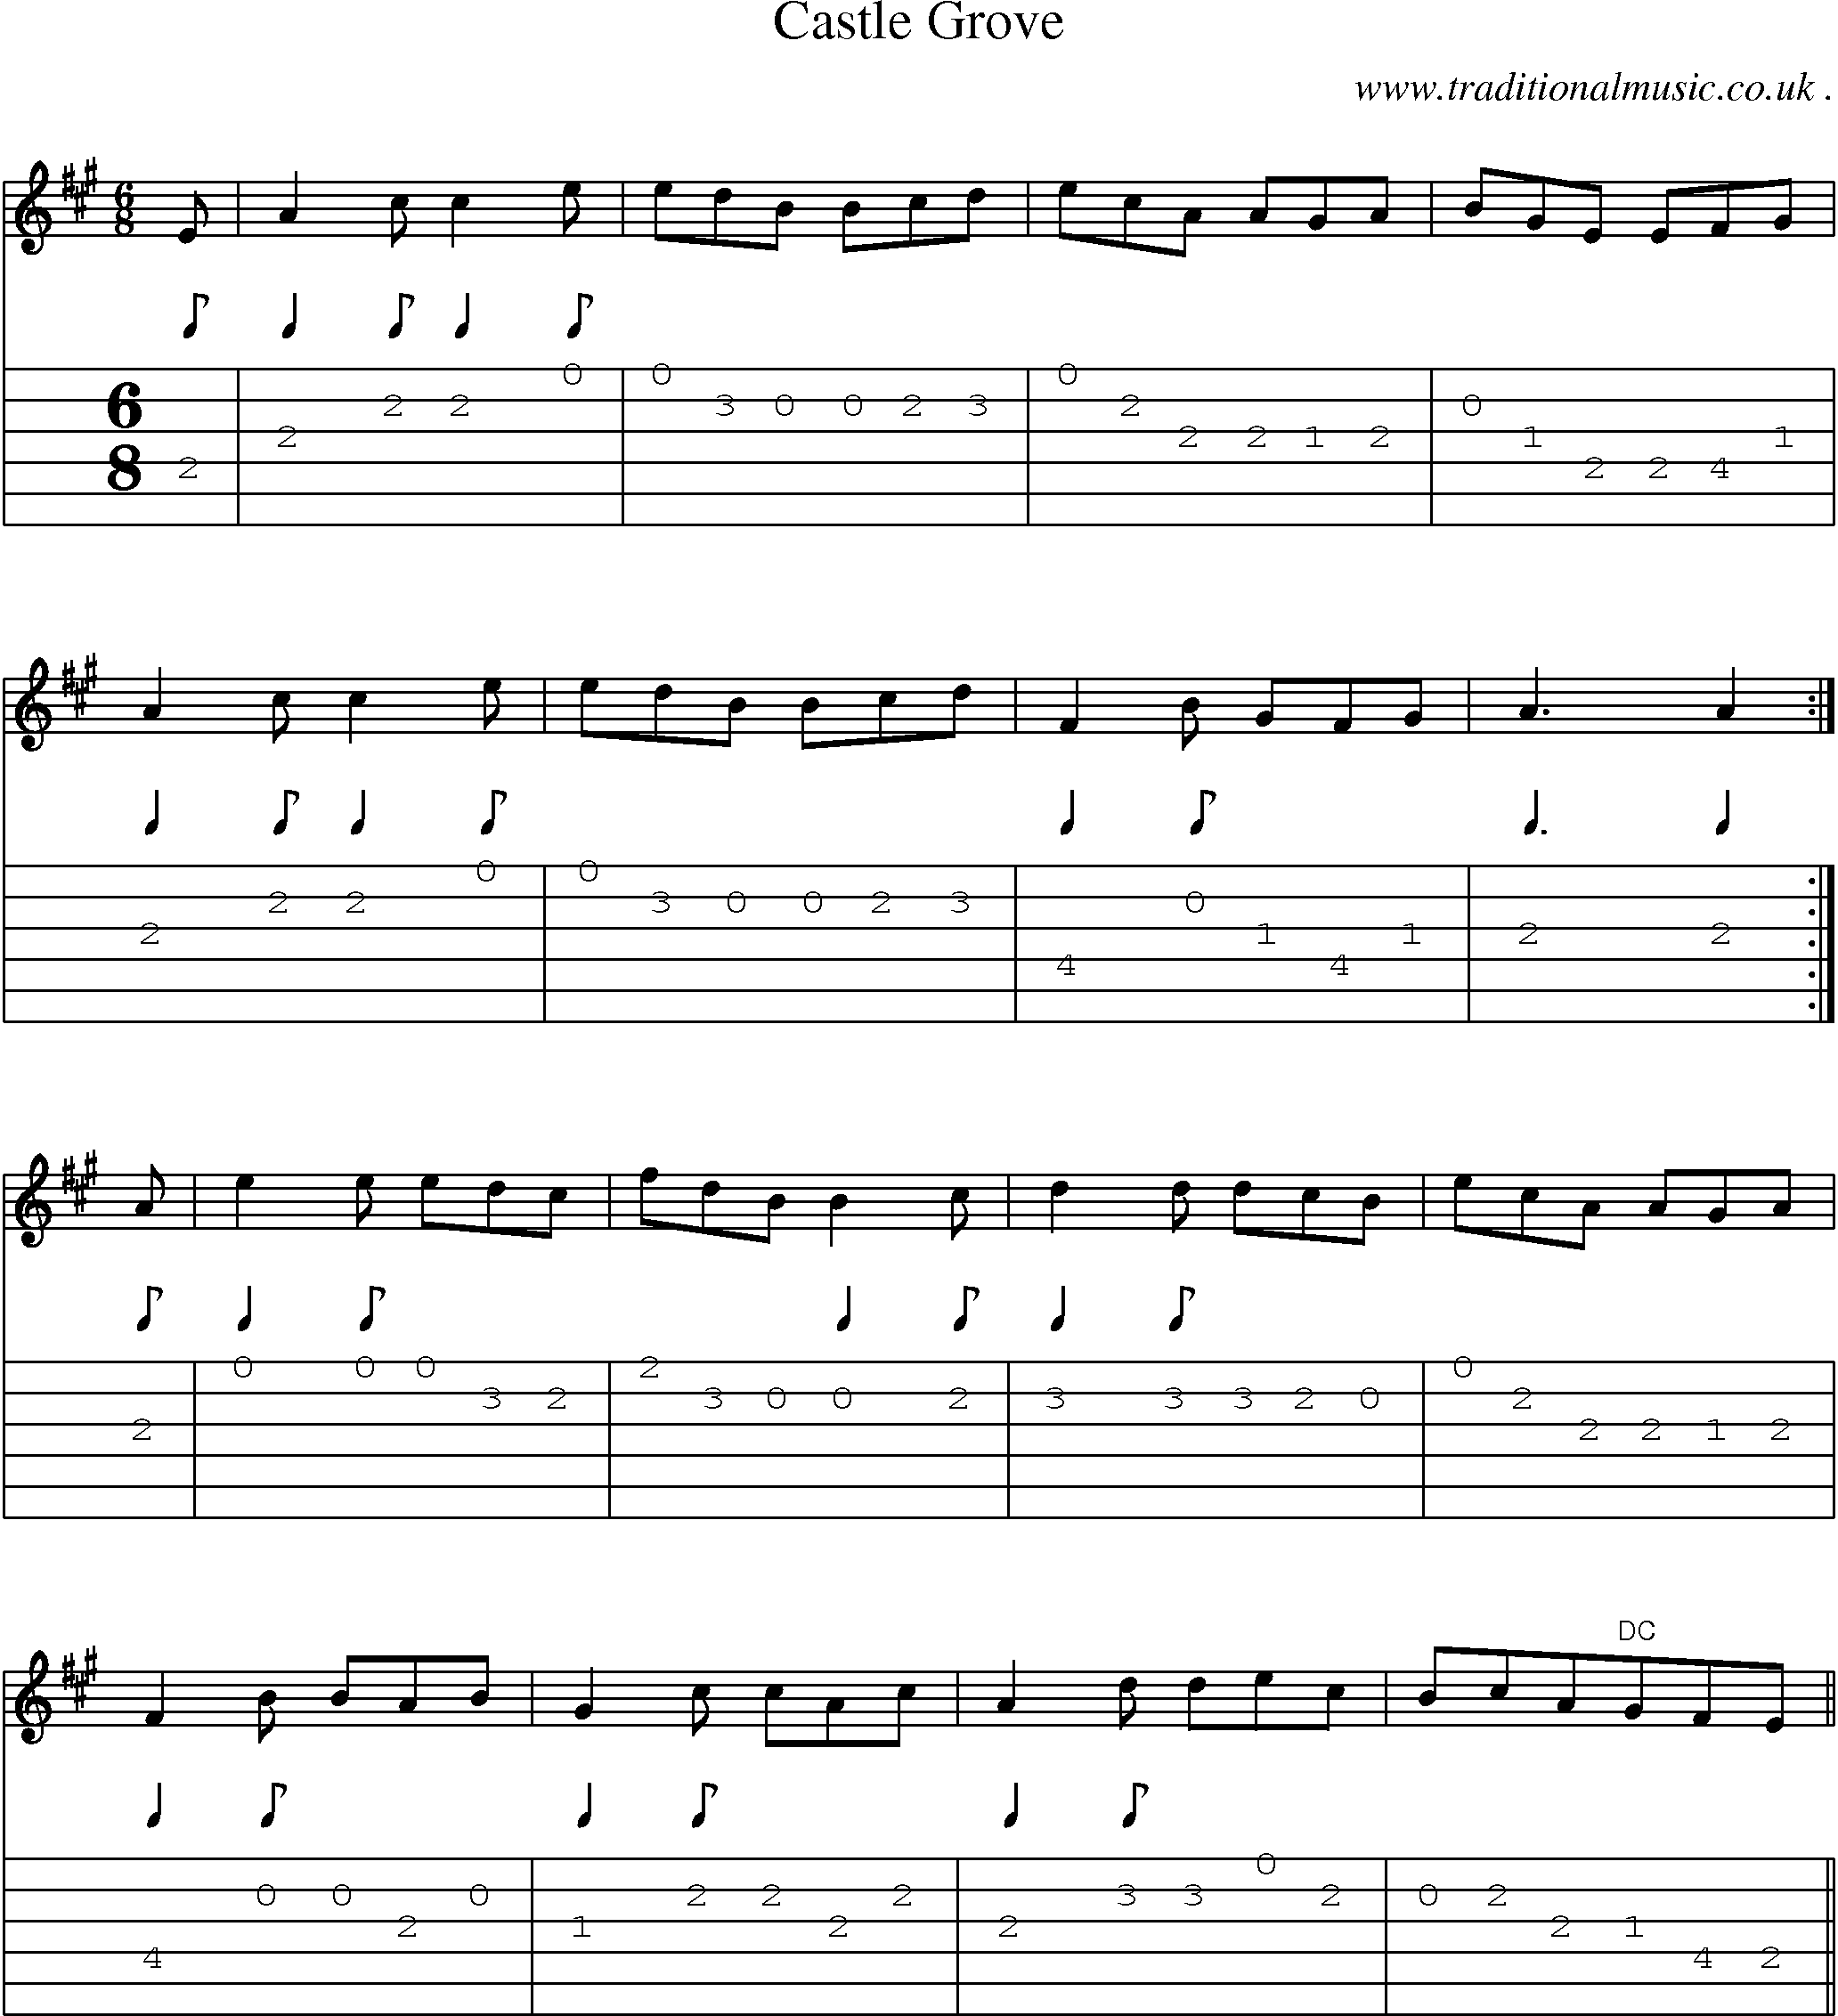 Sheet-Music and Guitar Tabs for Castle Grove